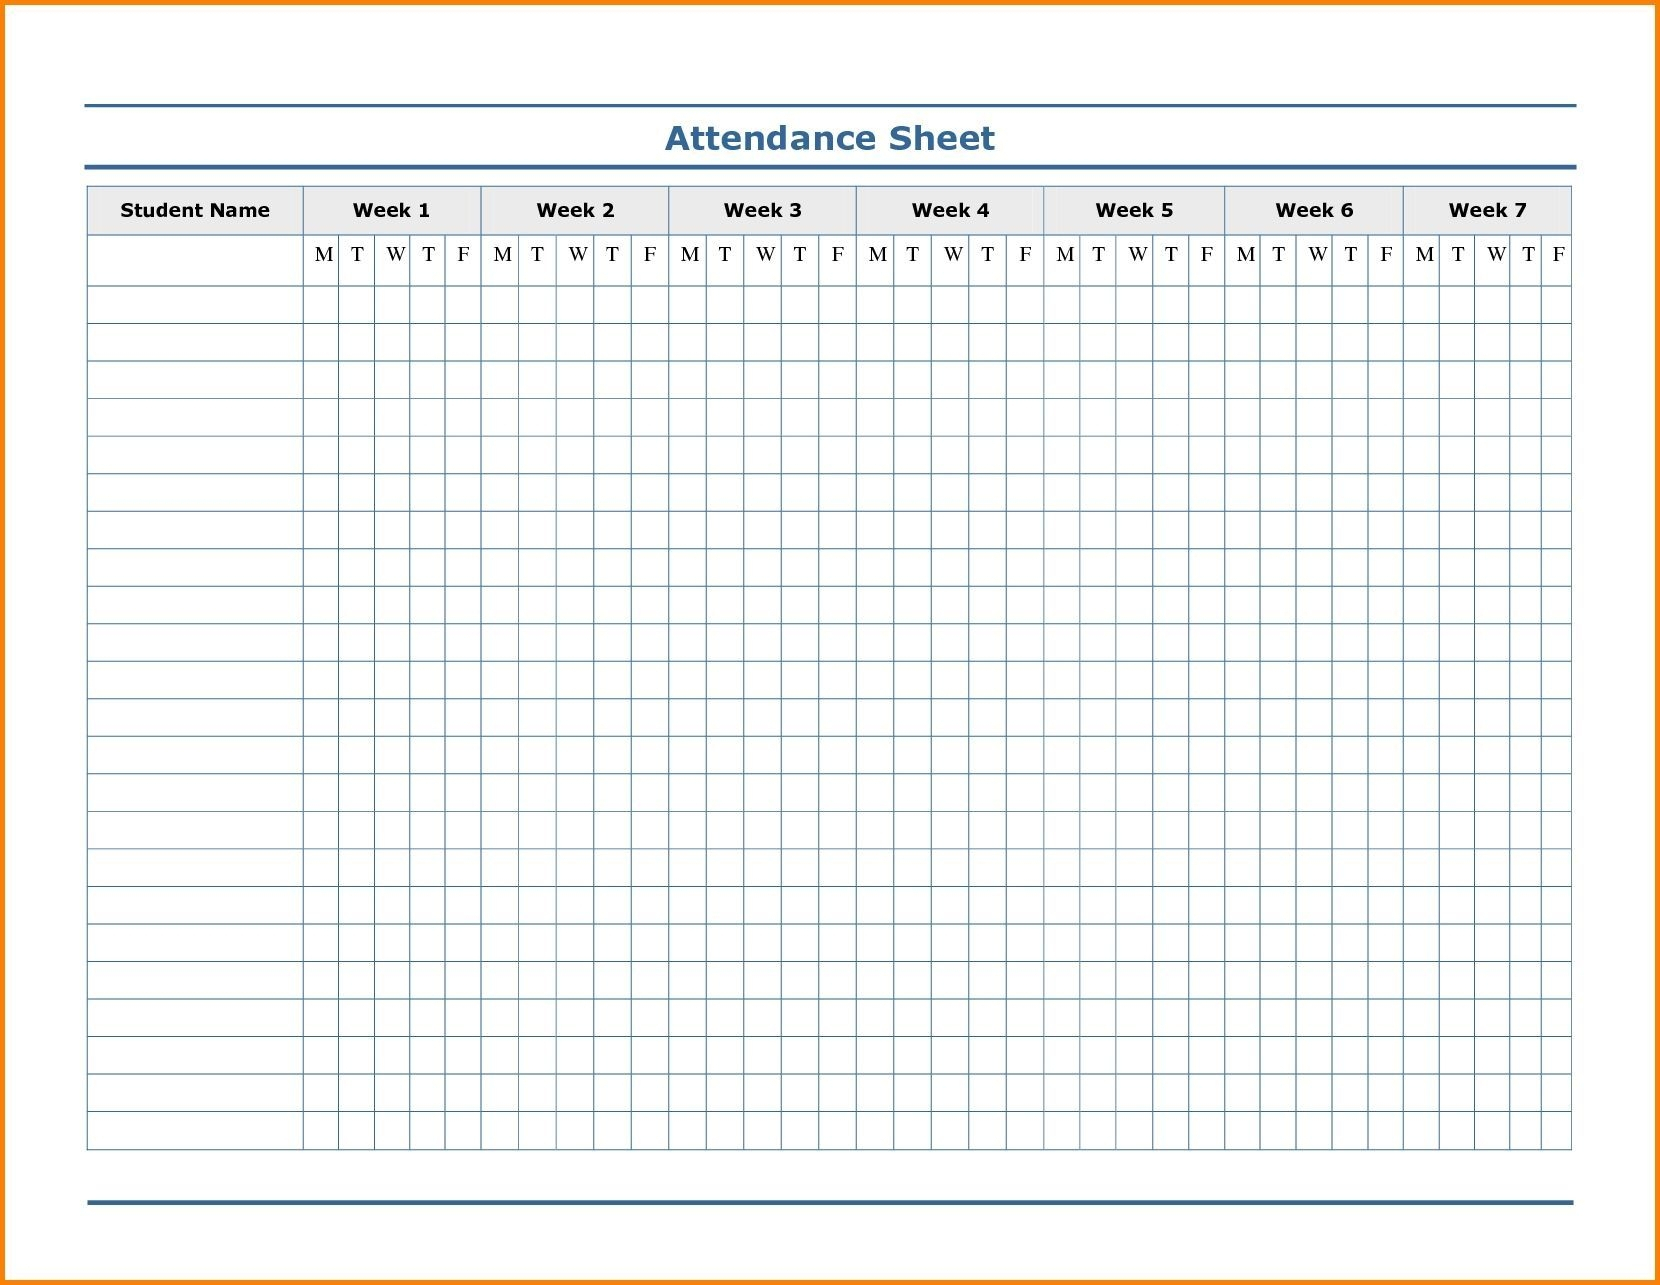 Effective Calendar For The Next 2 Weeks | Get Your pertaining to Printable Calendar Two Weeks